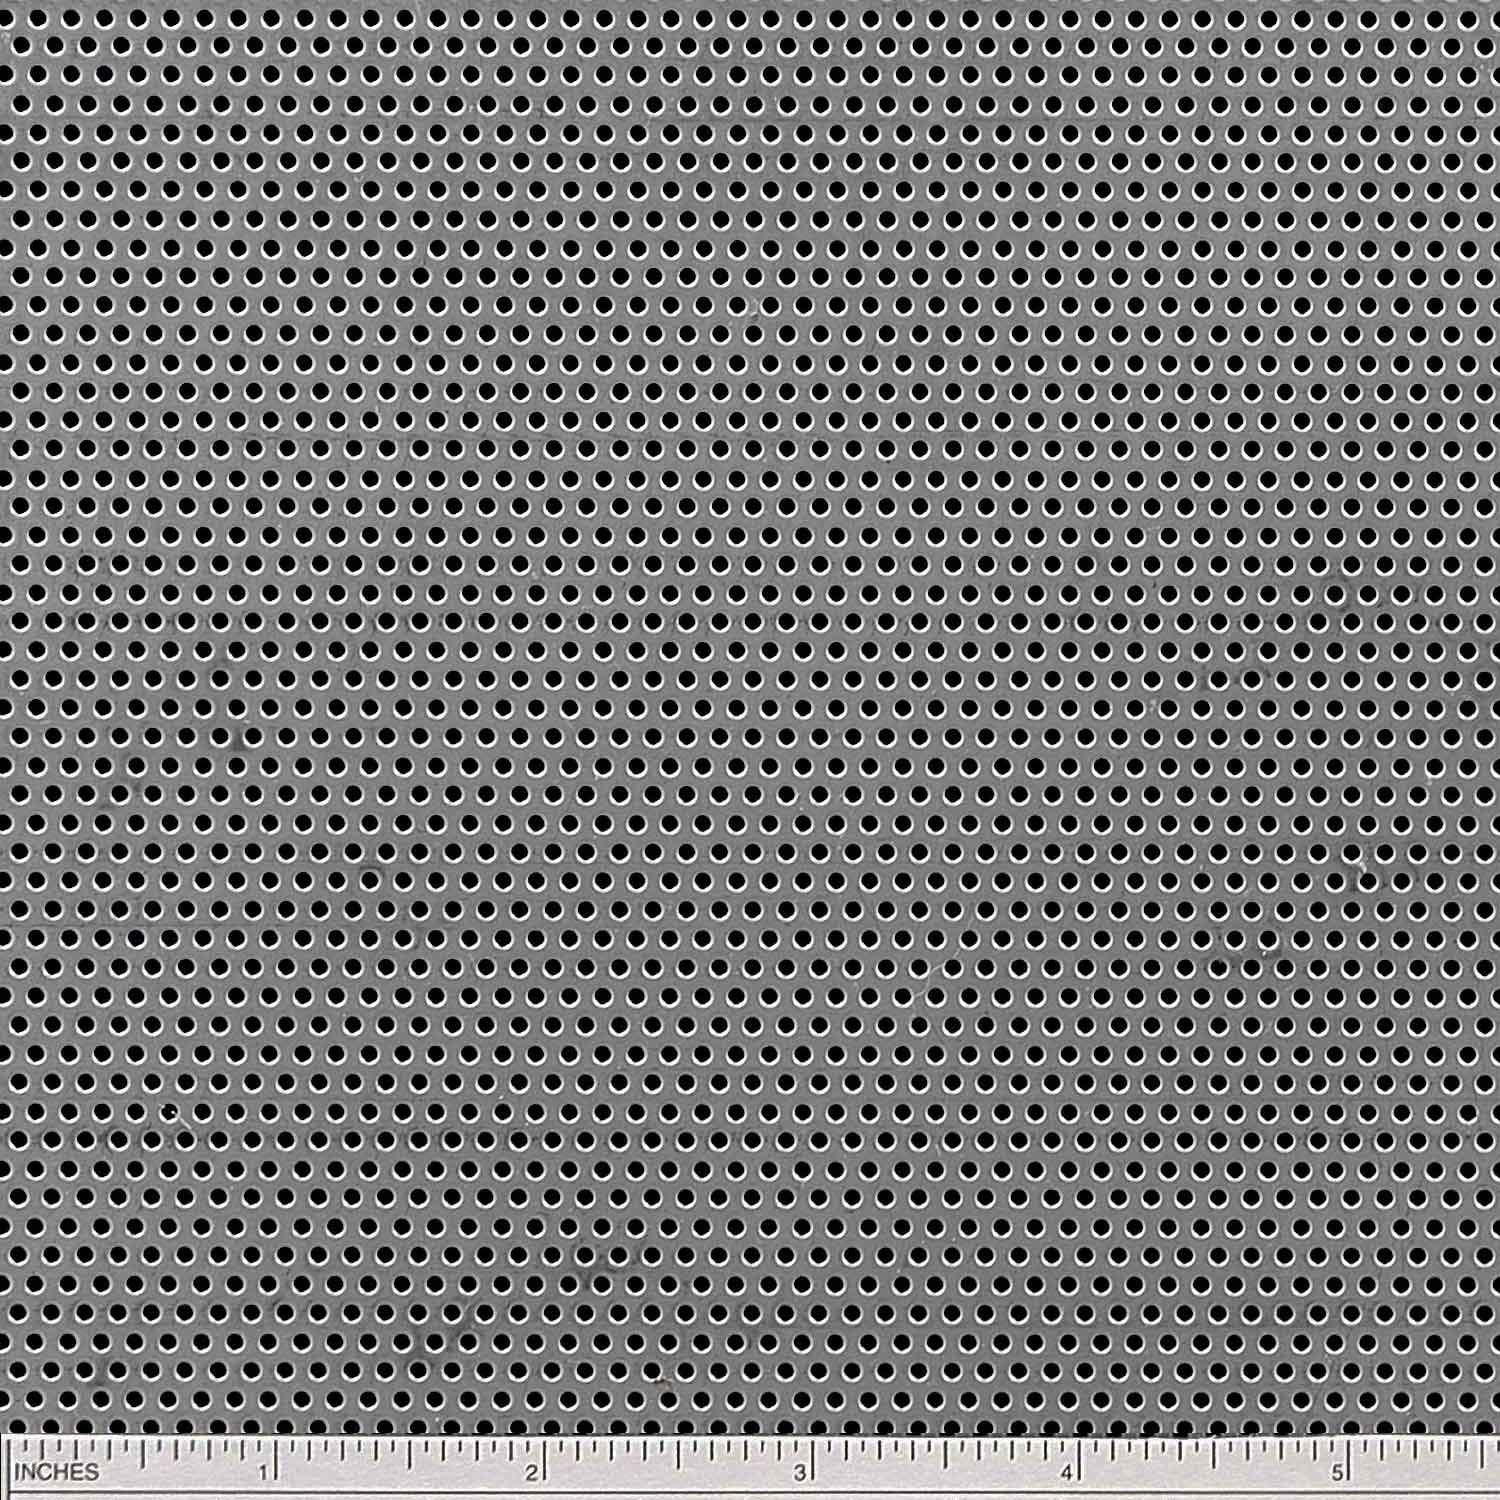 Aluminum Perforated Sheet .062 1/16" 12" x 36" 1/2" Round hole 11/16" Stagger 